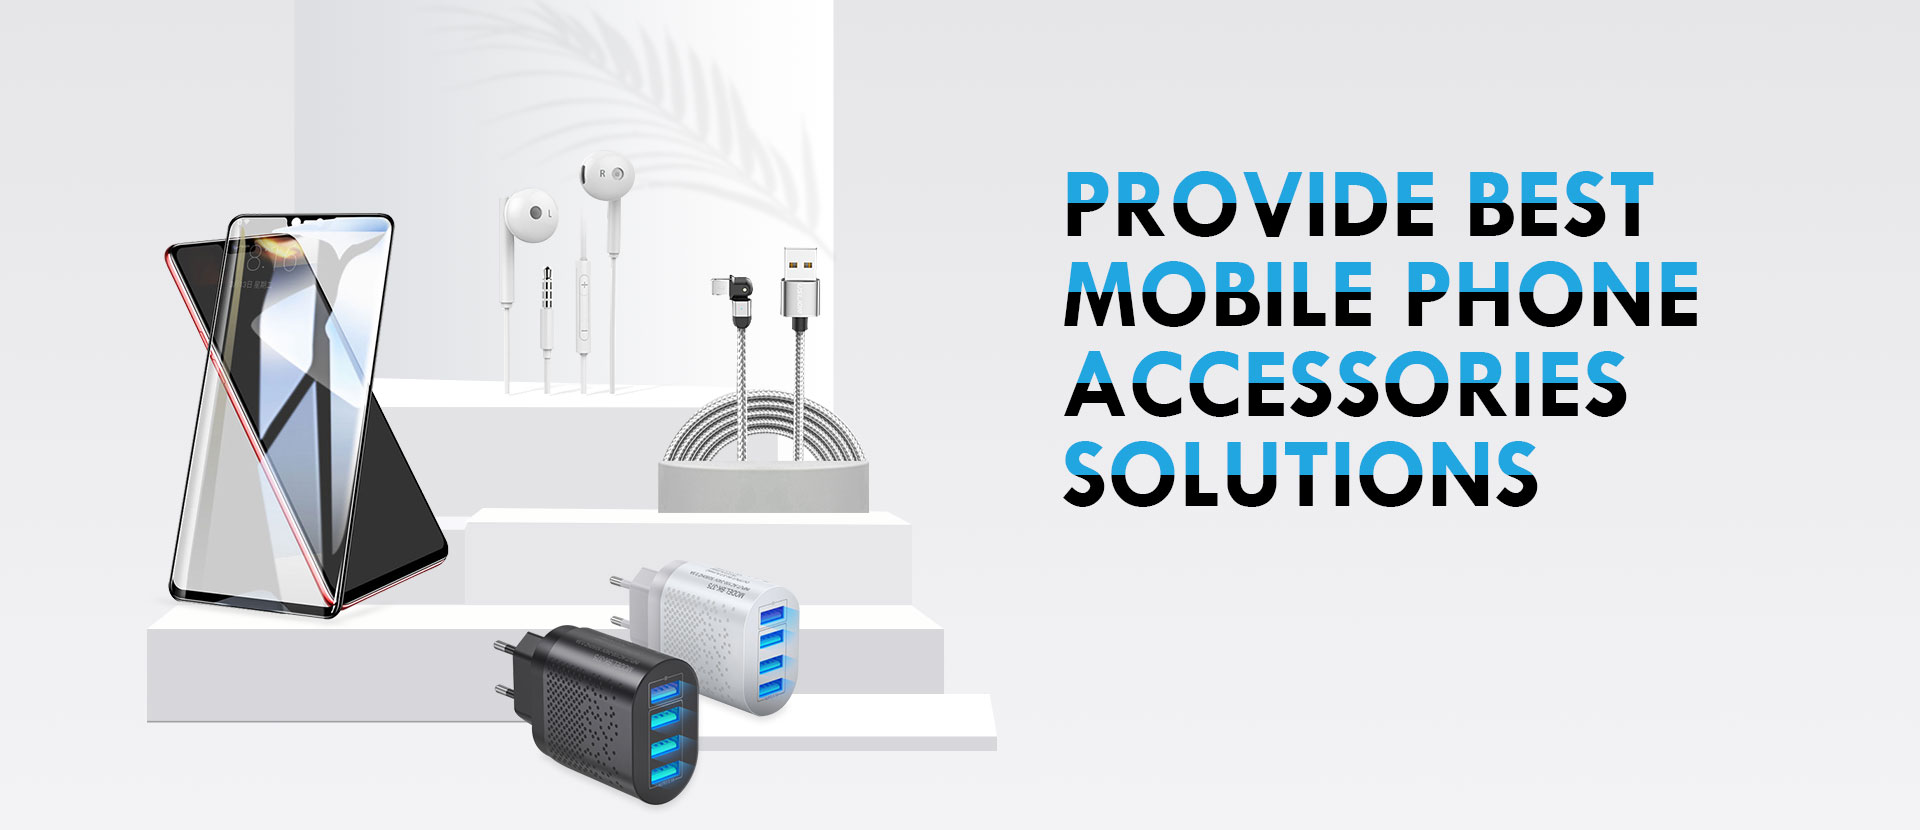 PROVIDE BEST MOBILE PHONE ACCESSORIES SOLUYIONS